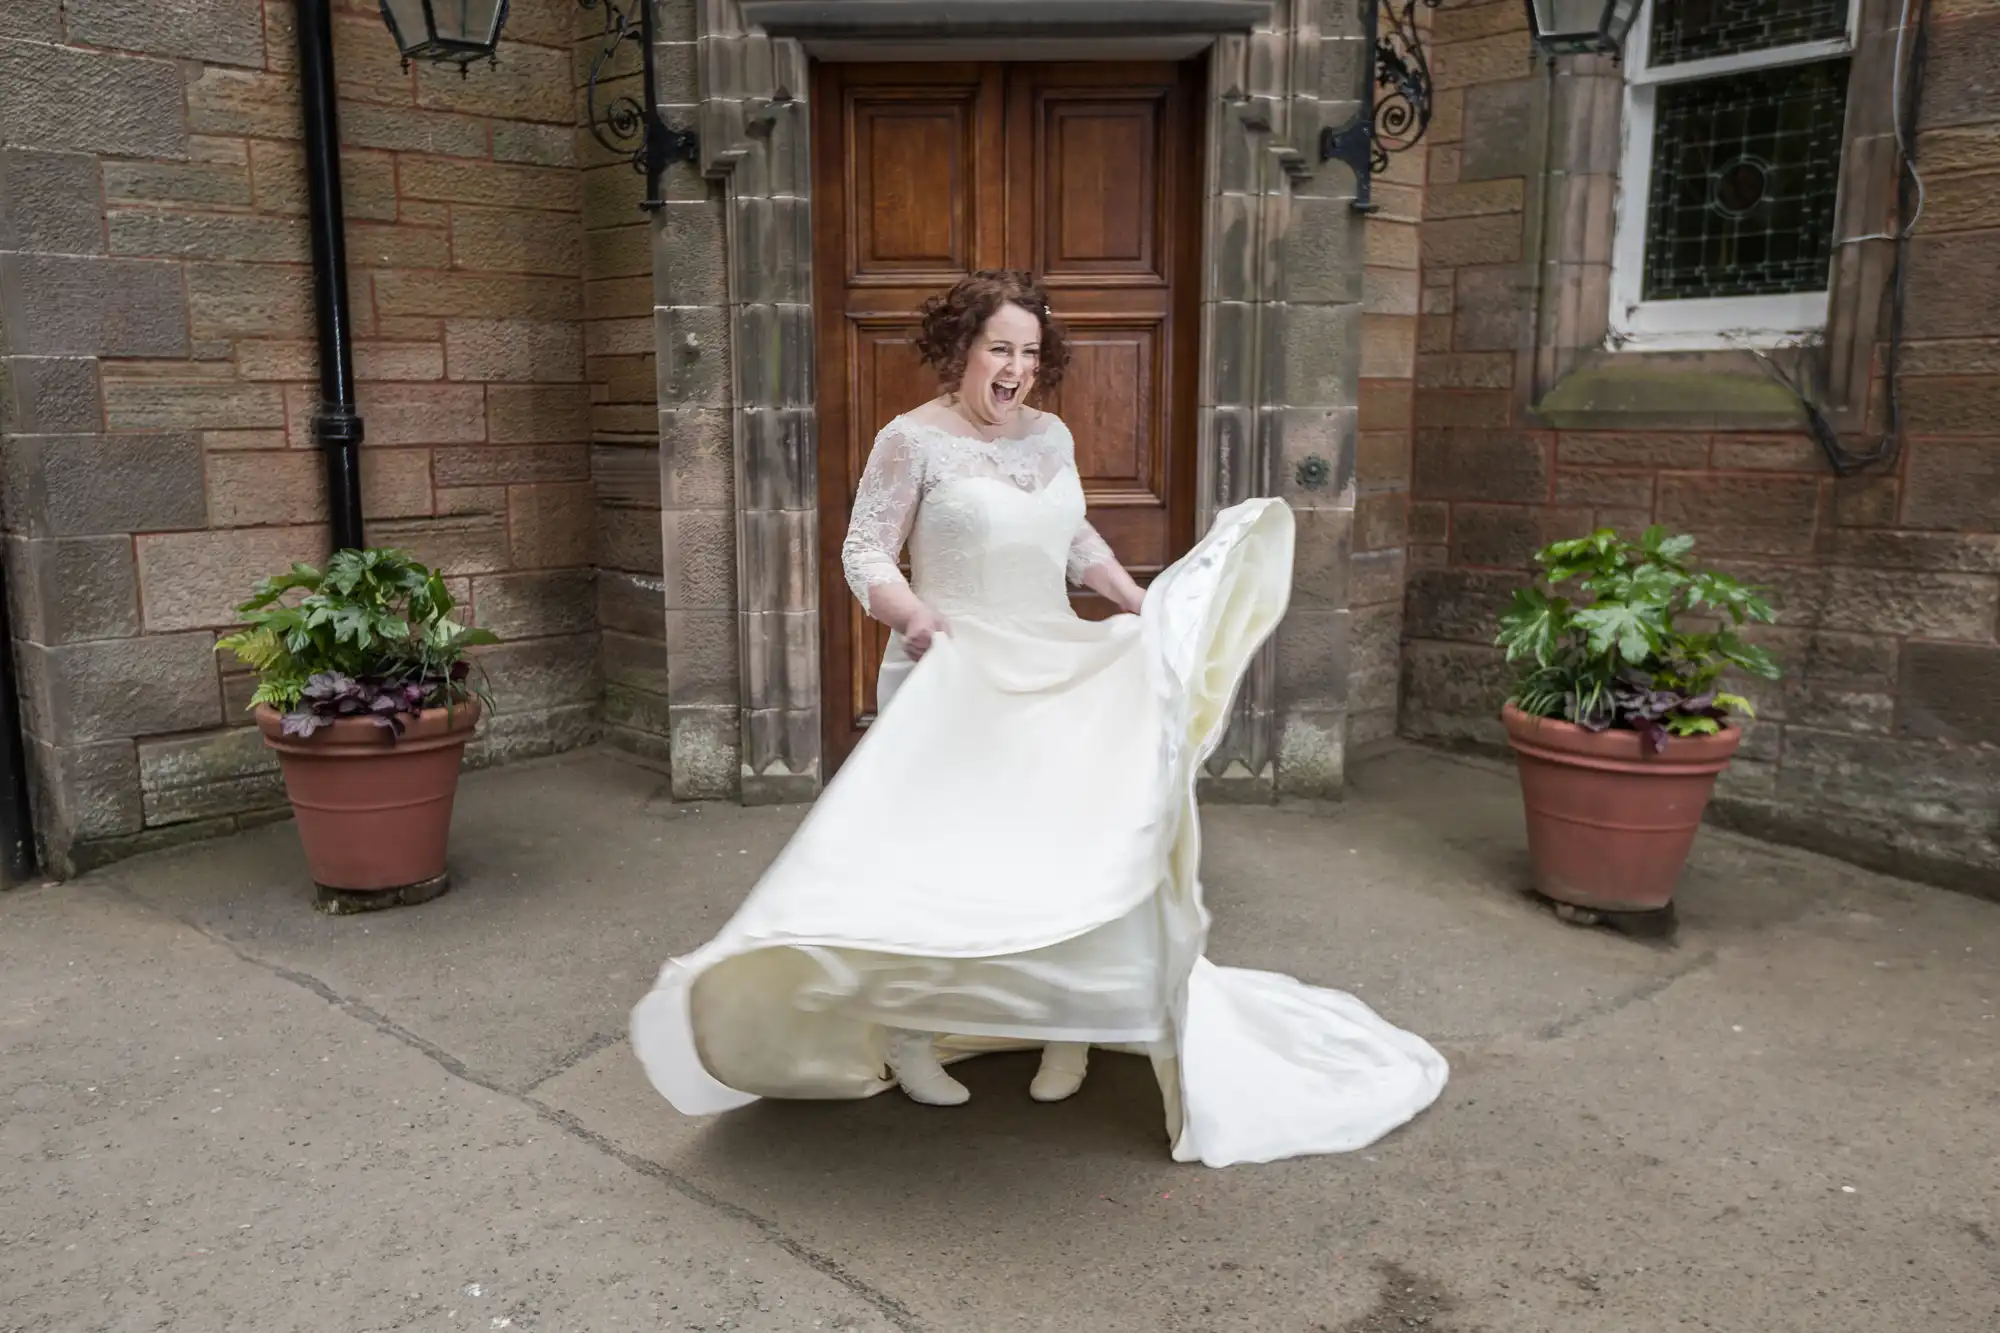 A bride wearing a wedding dress twirls joyfully in front of a wooden door, flanked by potted plants on a stone patio.